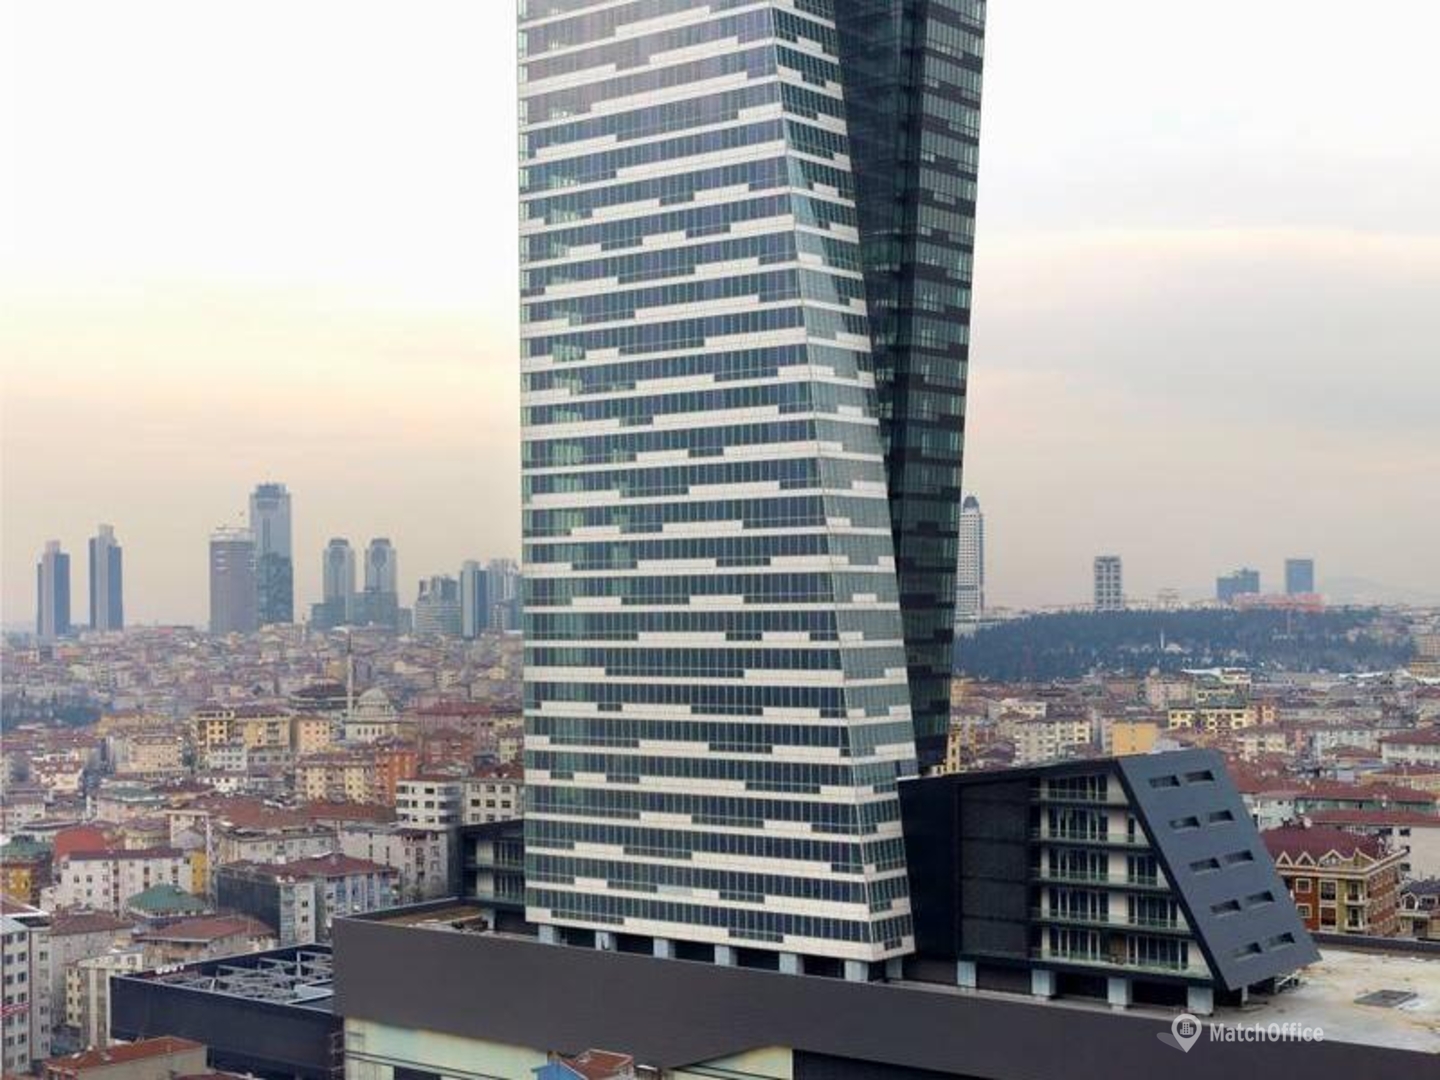 business parks for rent in istanbul city center matchoffice